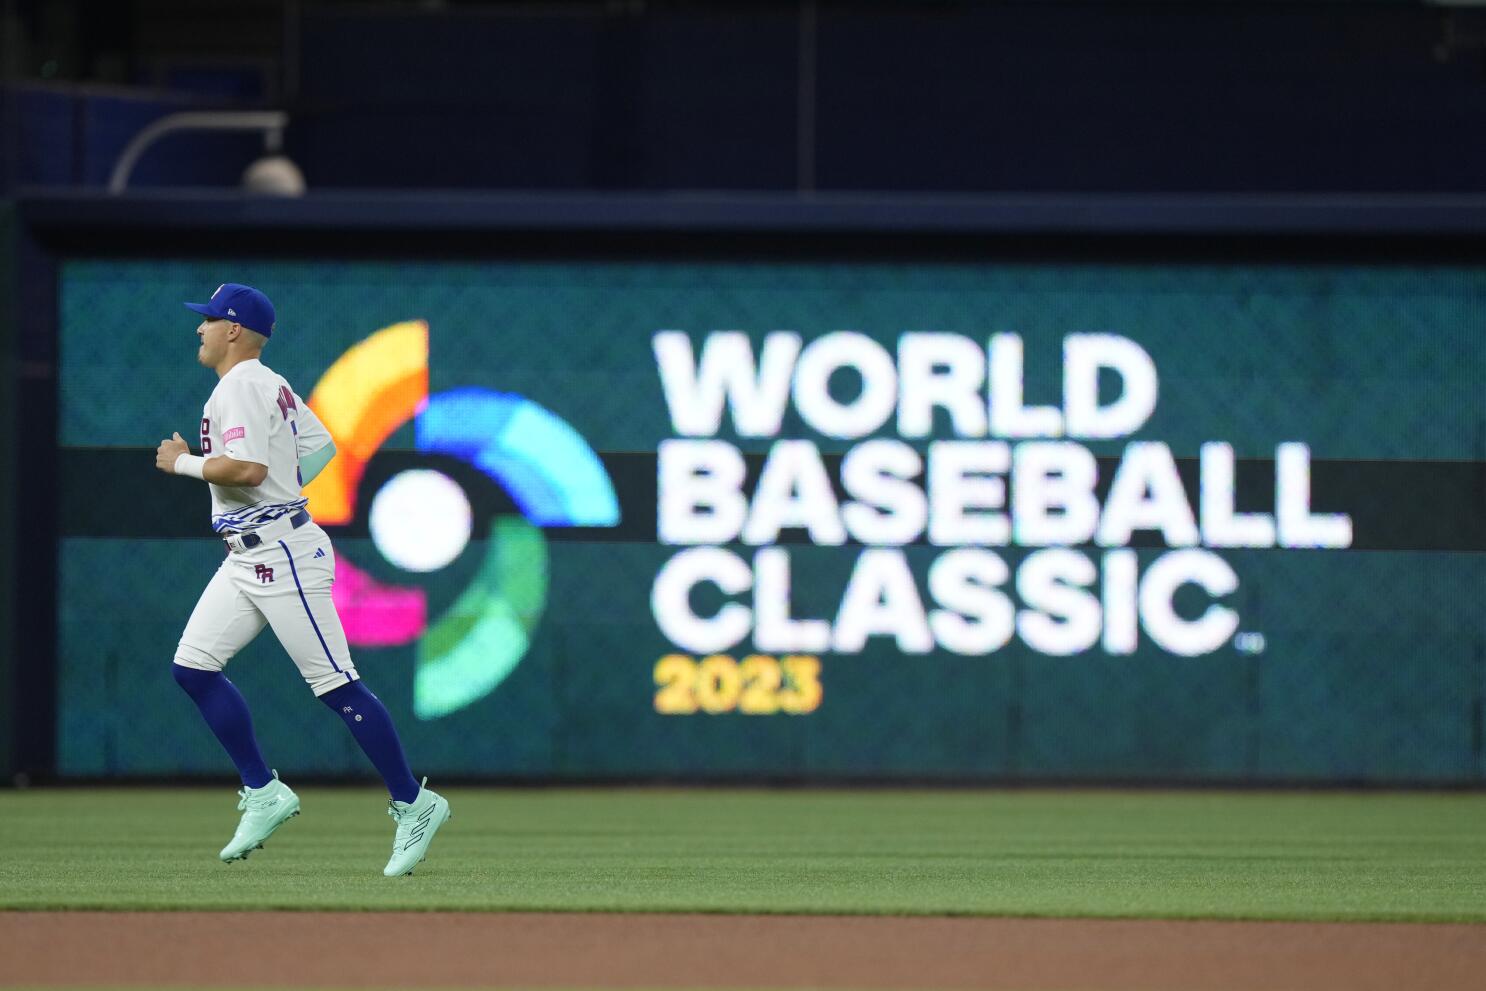 2023 WORLD BASEBALL CLASSIC SCHEDULE ANNOUNCED FOR MIAMI AND